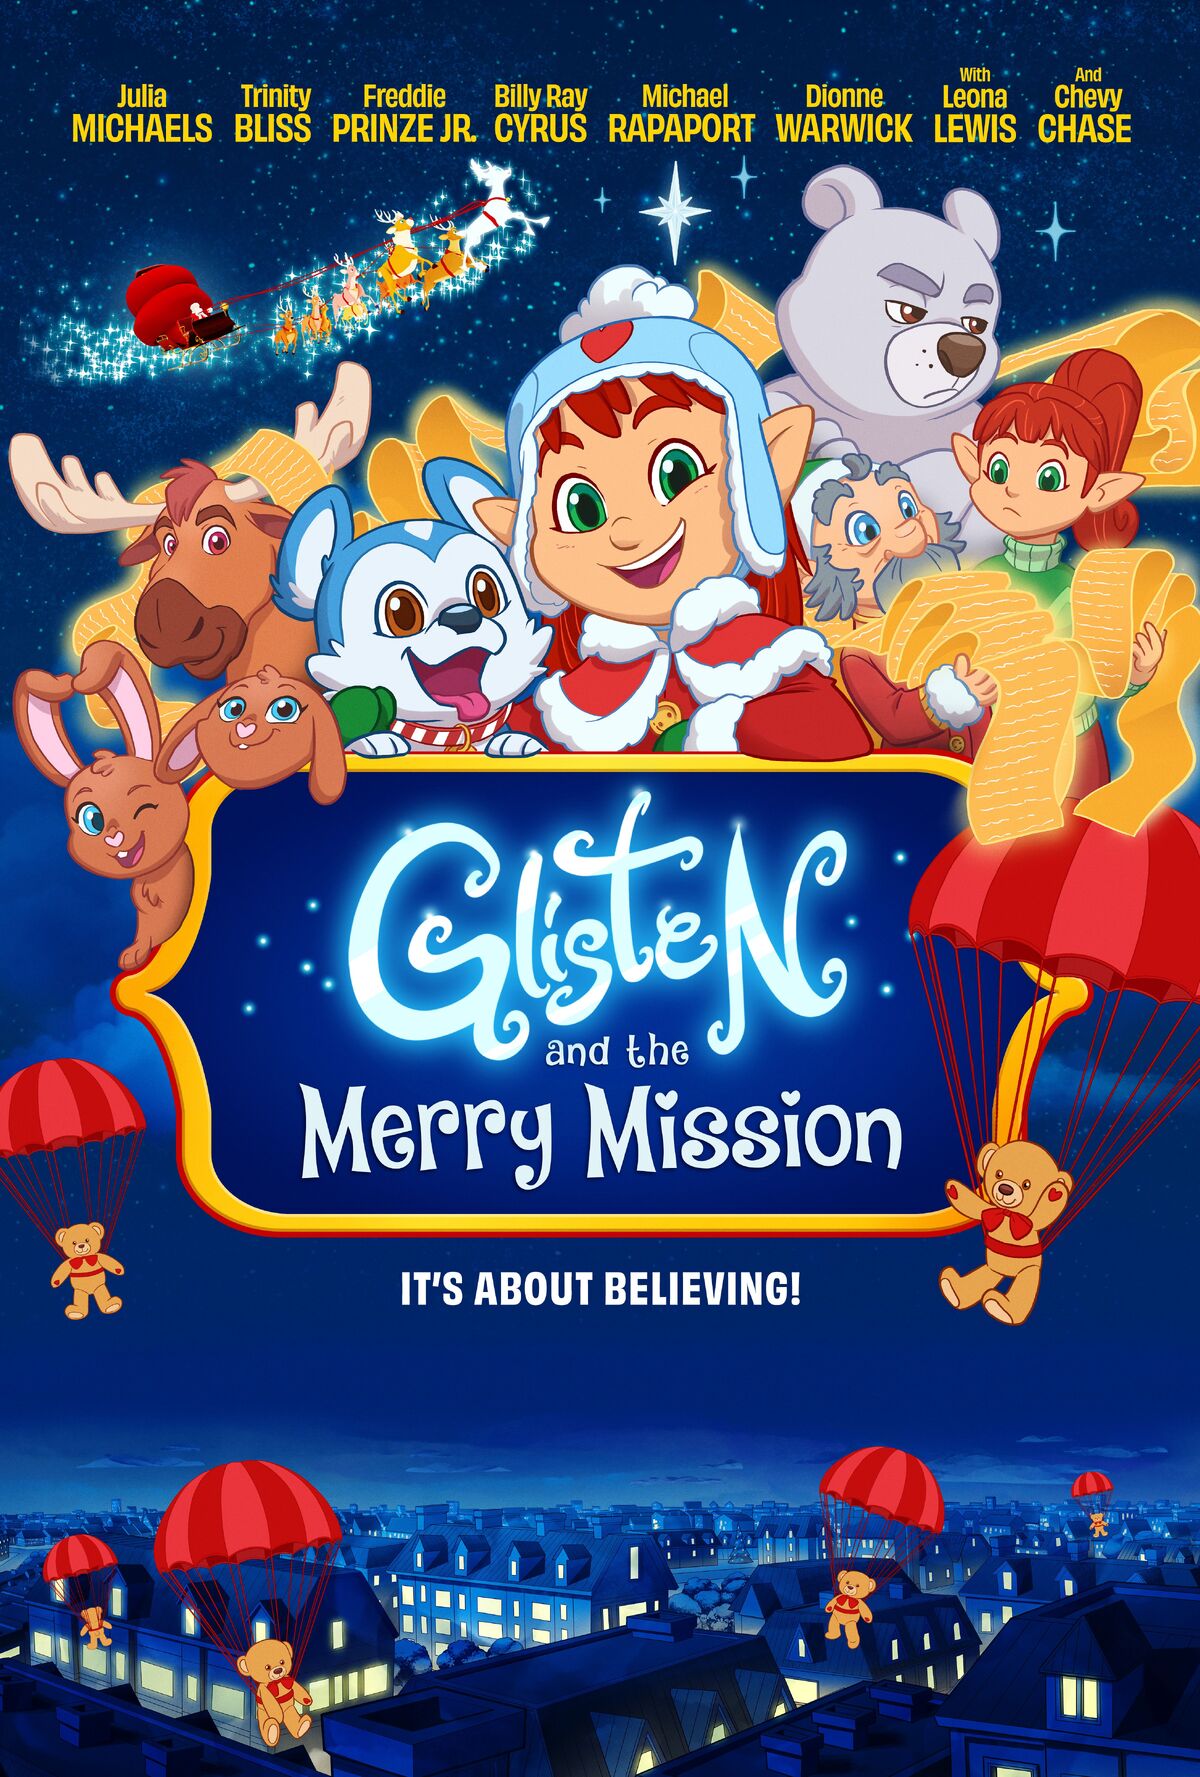 Glisten and the Merry Mission Christmas Specials Wiki Fandom